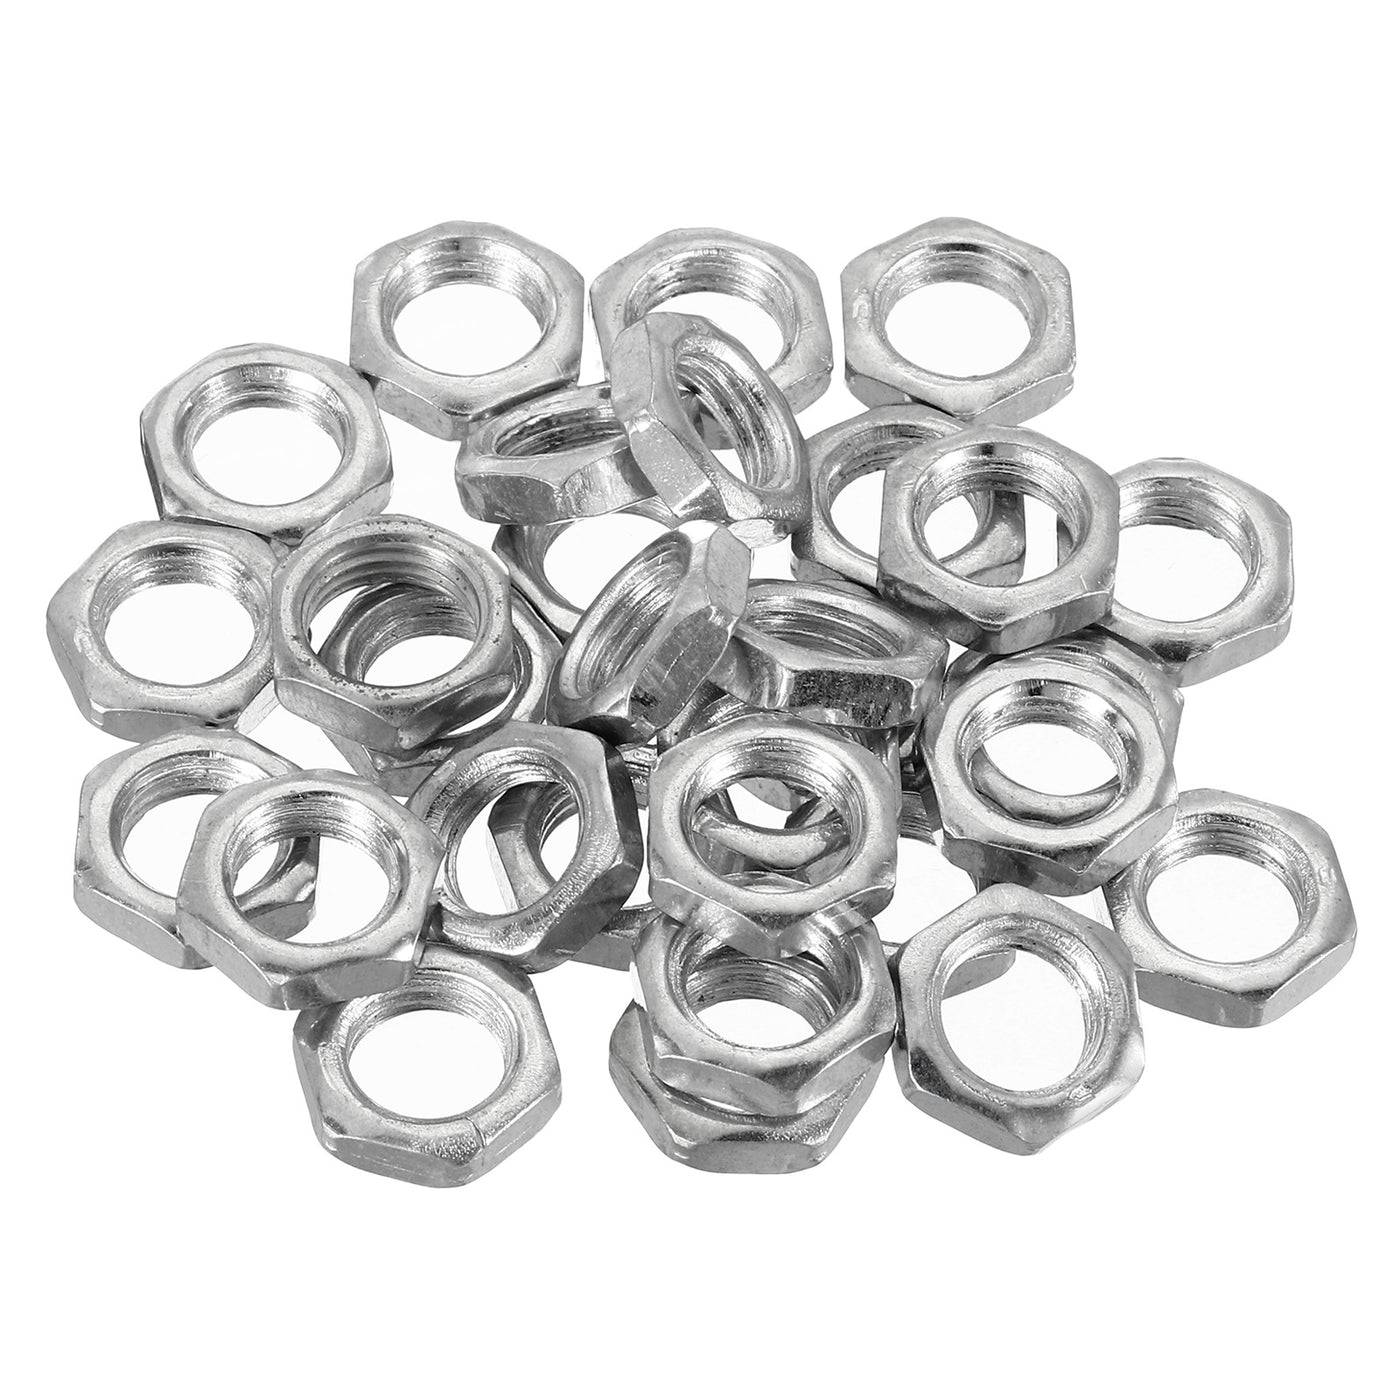 Harfington M12 x 1.5 Steel Hex Nuts, 20 Pack Metric Thread Zinc Plated Finished Hardware Nuts Screw Bolt Fasteners 5mm Height